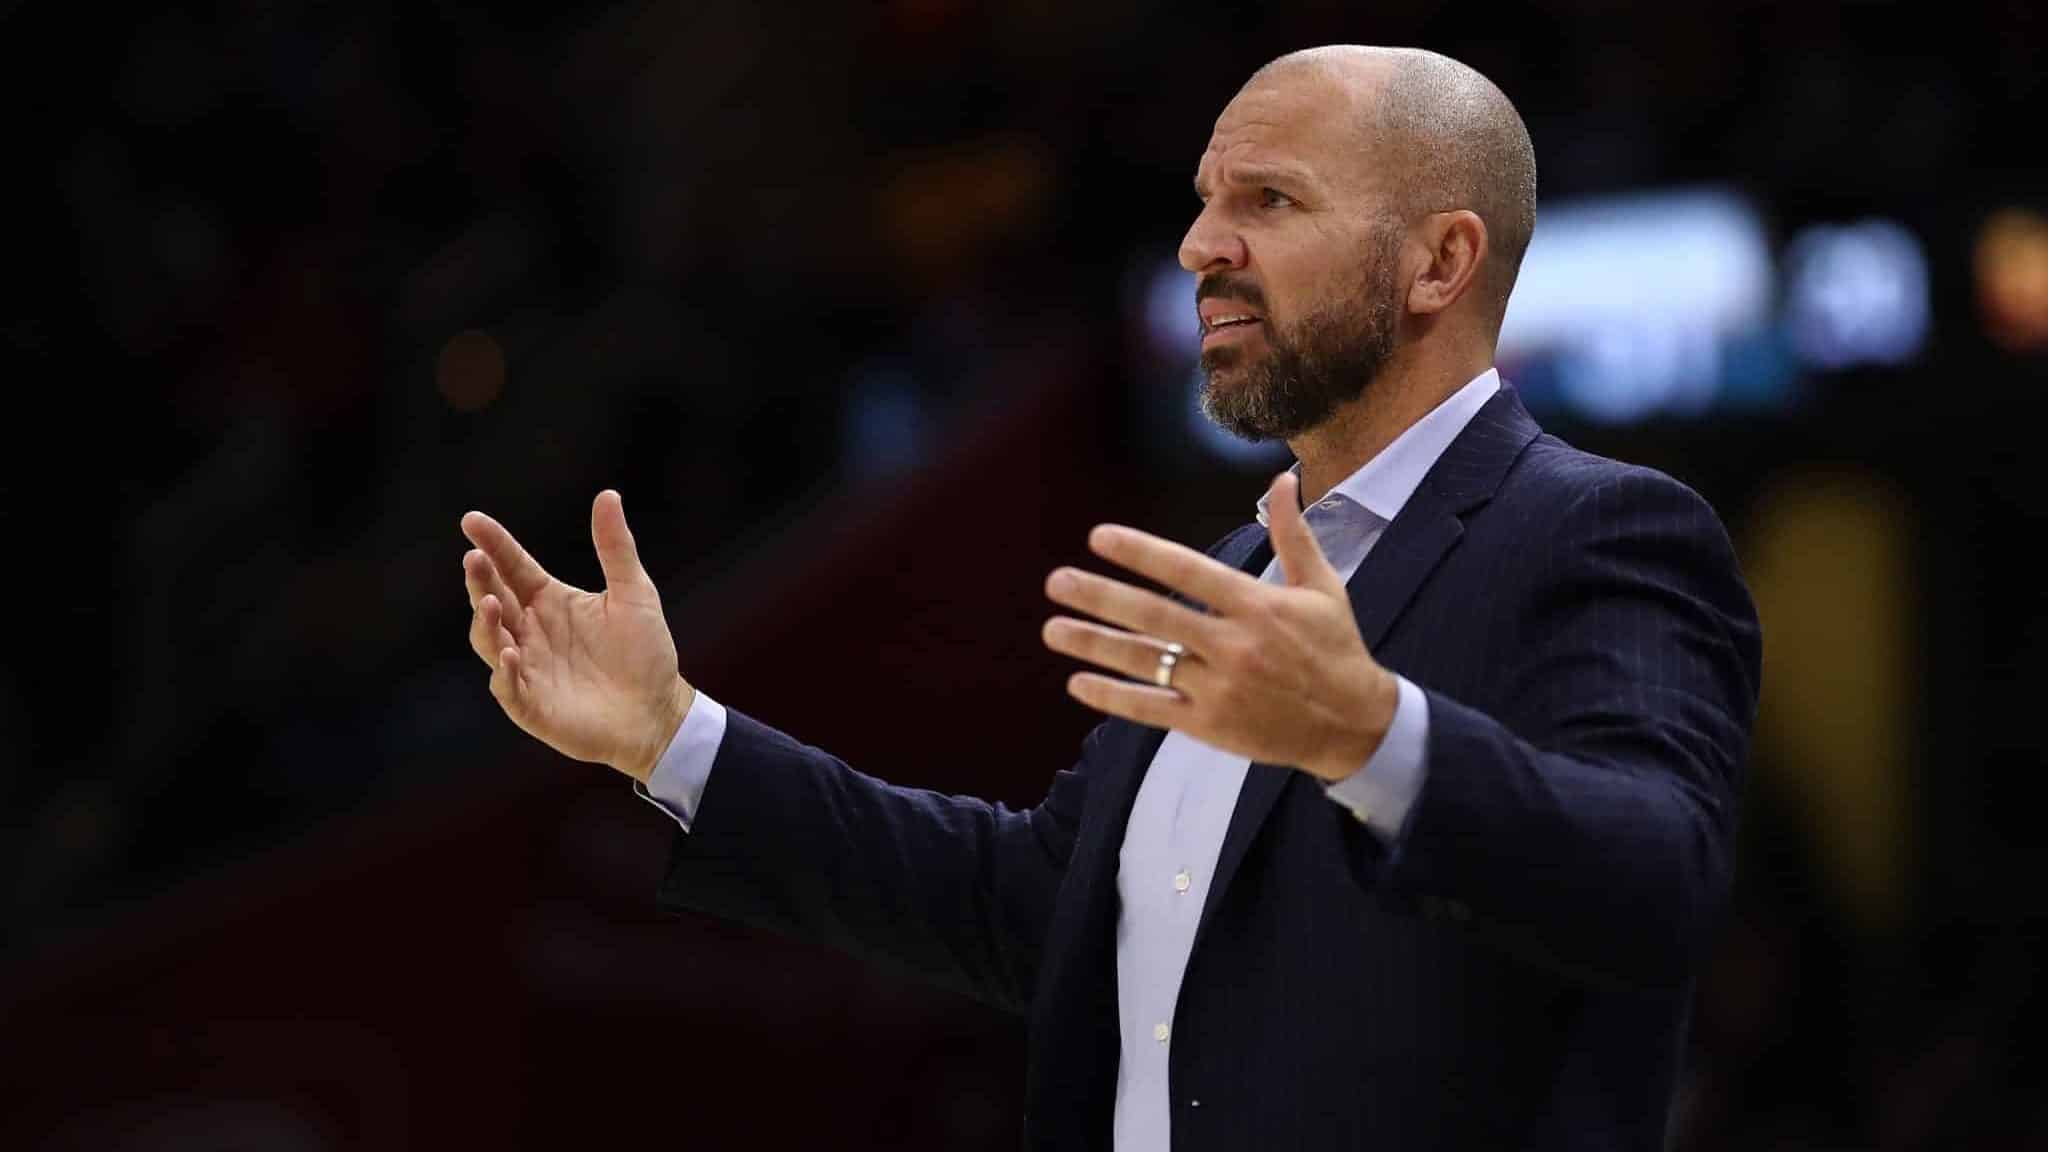 CLEVELAND, OH - NOVEMBER 07: Head coach Jason Kidd of the Milwaukee Bucks looks on from the bench while playing the Cleveland Cavaliers at Quicken Loans Arena on November 7, 2017 in Cleveland, Ohio. Cleveland won the game 124-119. NOTE TO USER: User expressly acknowledges and agrees that, by downloading and or using this photograph, User is consenting to the terms and conditions of the Getty Images License Agreement.